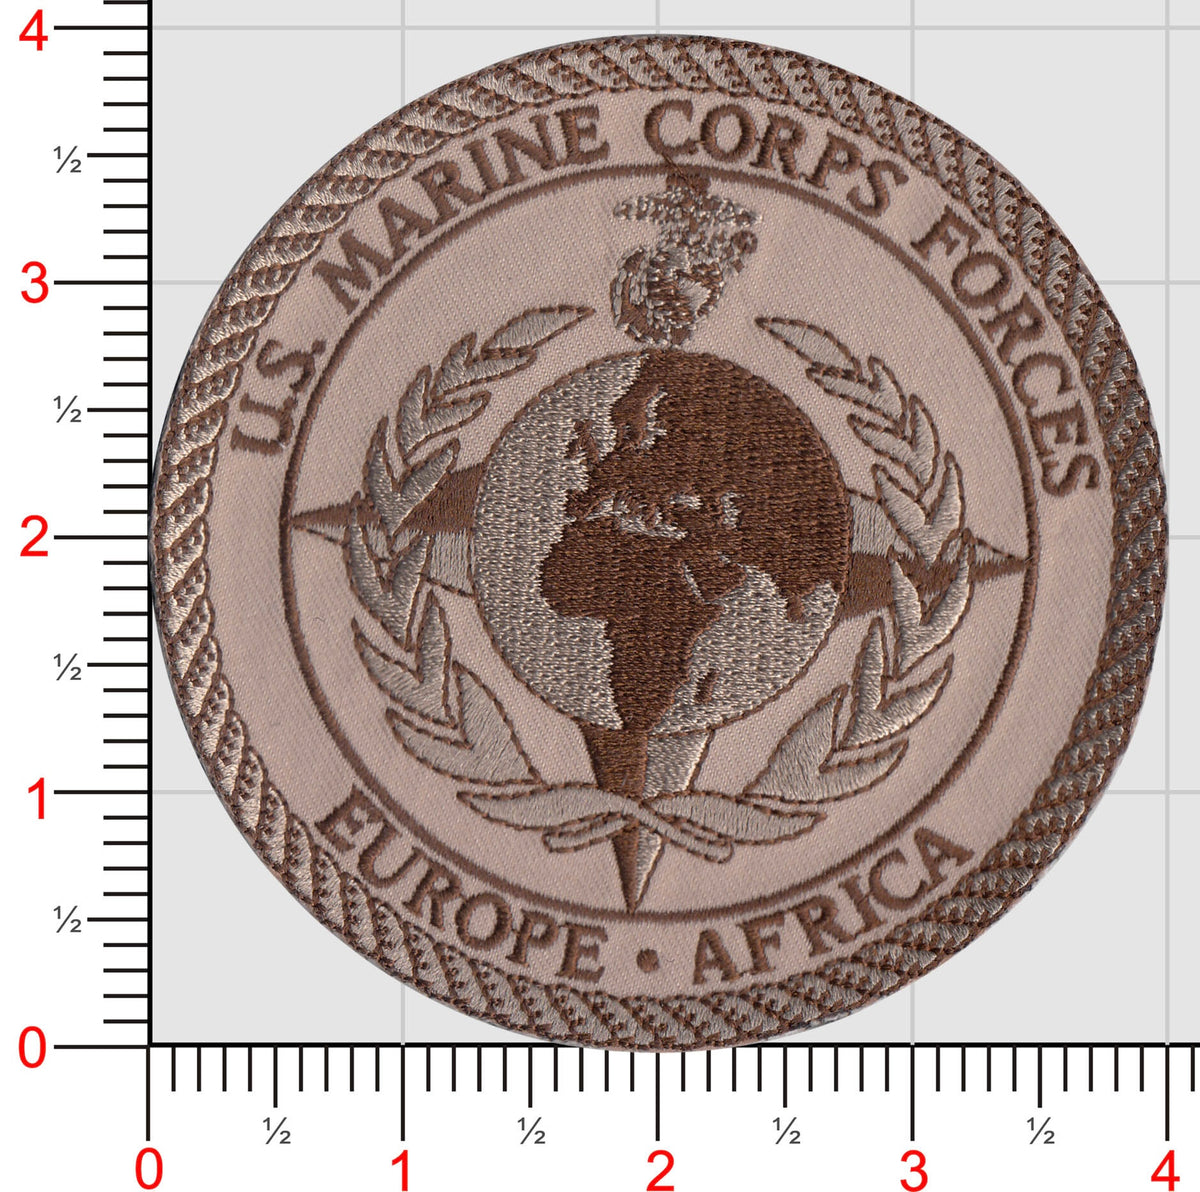 Officially Licensed USMC Marine Parent Patch – MarinePatches.com - Custom  Patches, Military and Law Enforcement